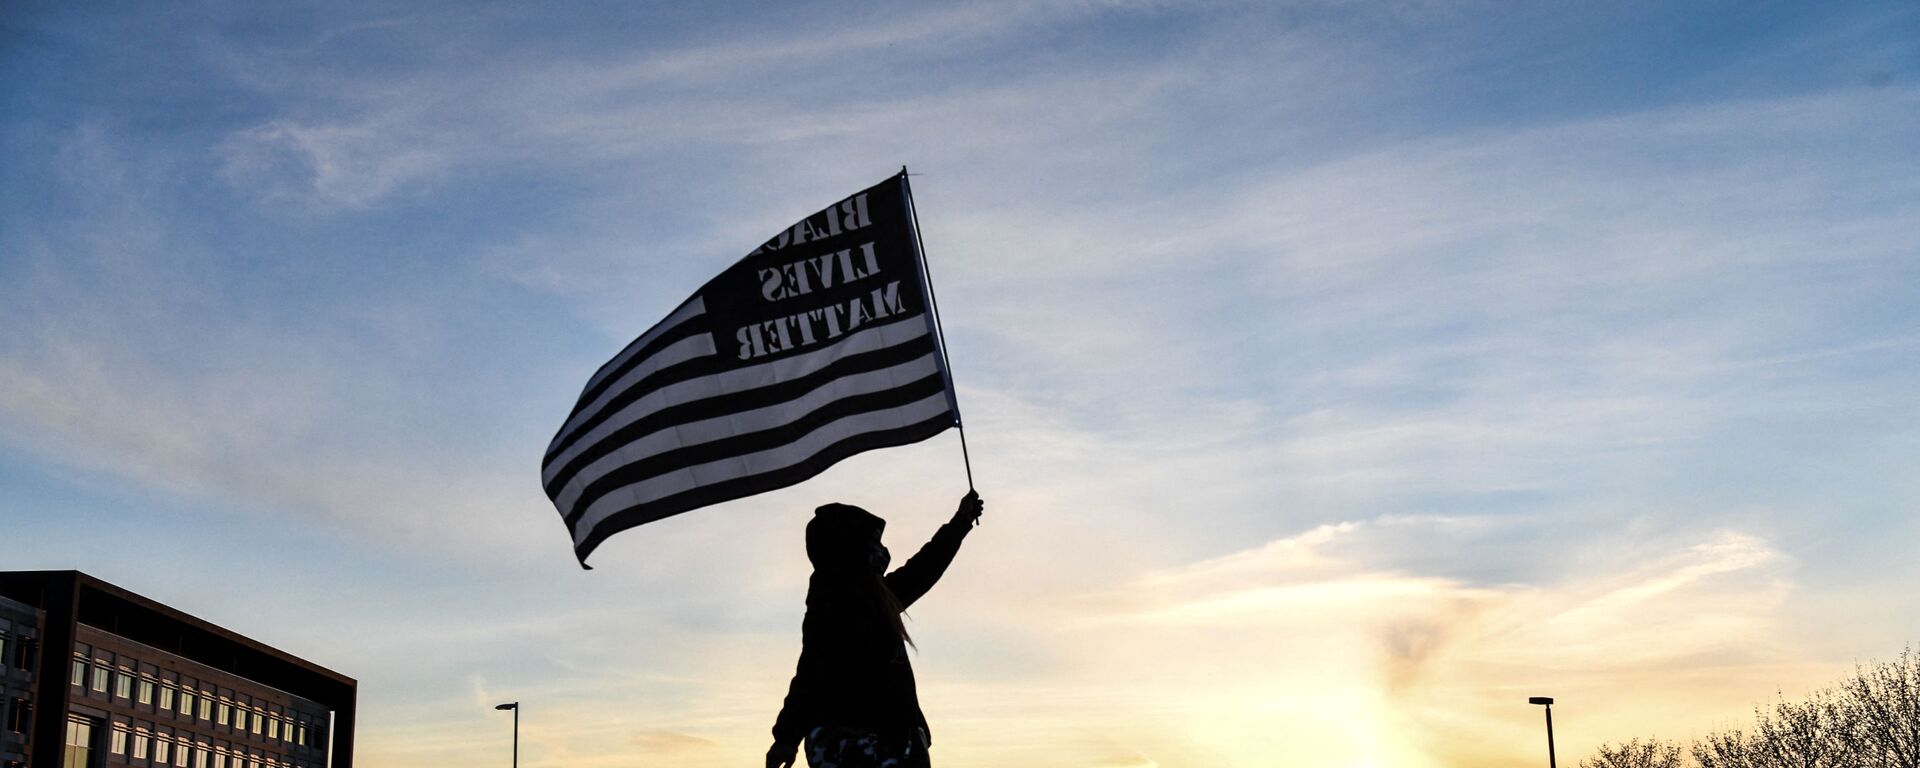 A demonstrator marches, holding a Black Lives Matter flag, during the sixth night of protests over the shooting death of Daunte Wright by a police officer in Brooklyn Center, Minnesota on April 16, 2021 - Sputnik International, 1920, 05.04.2022